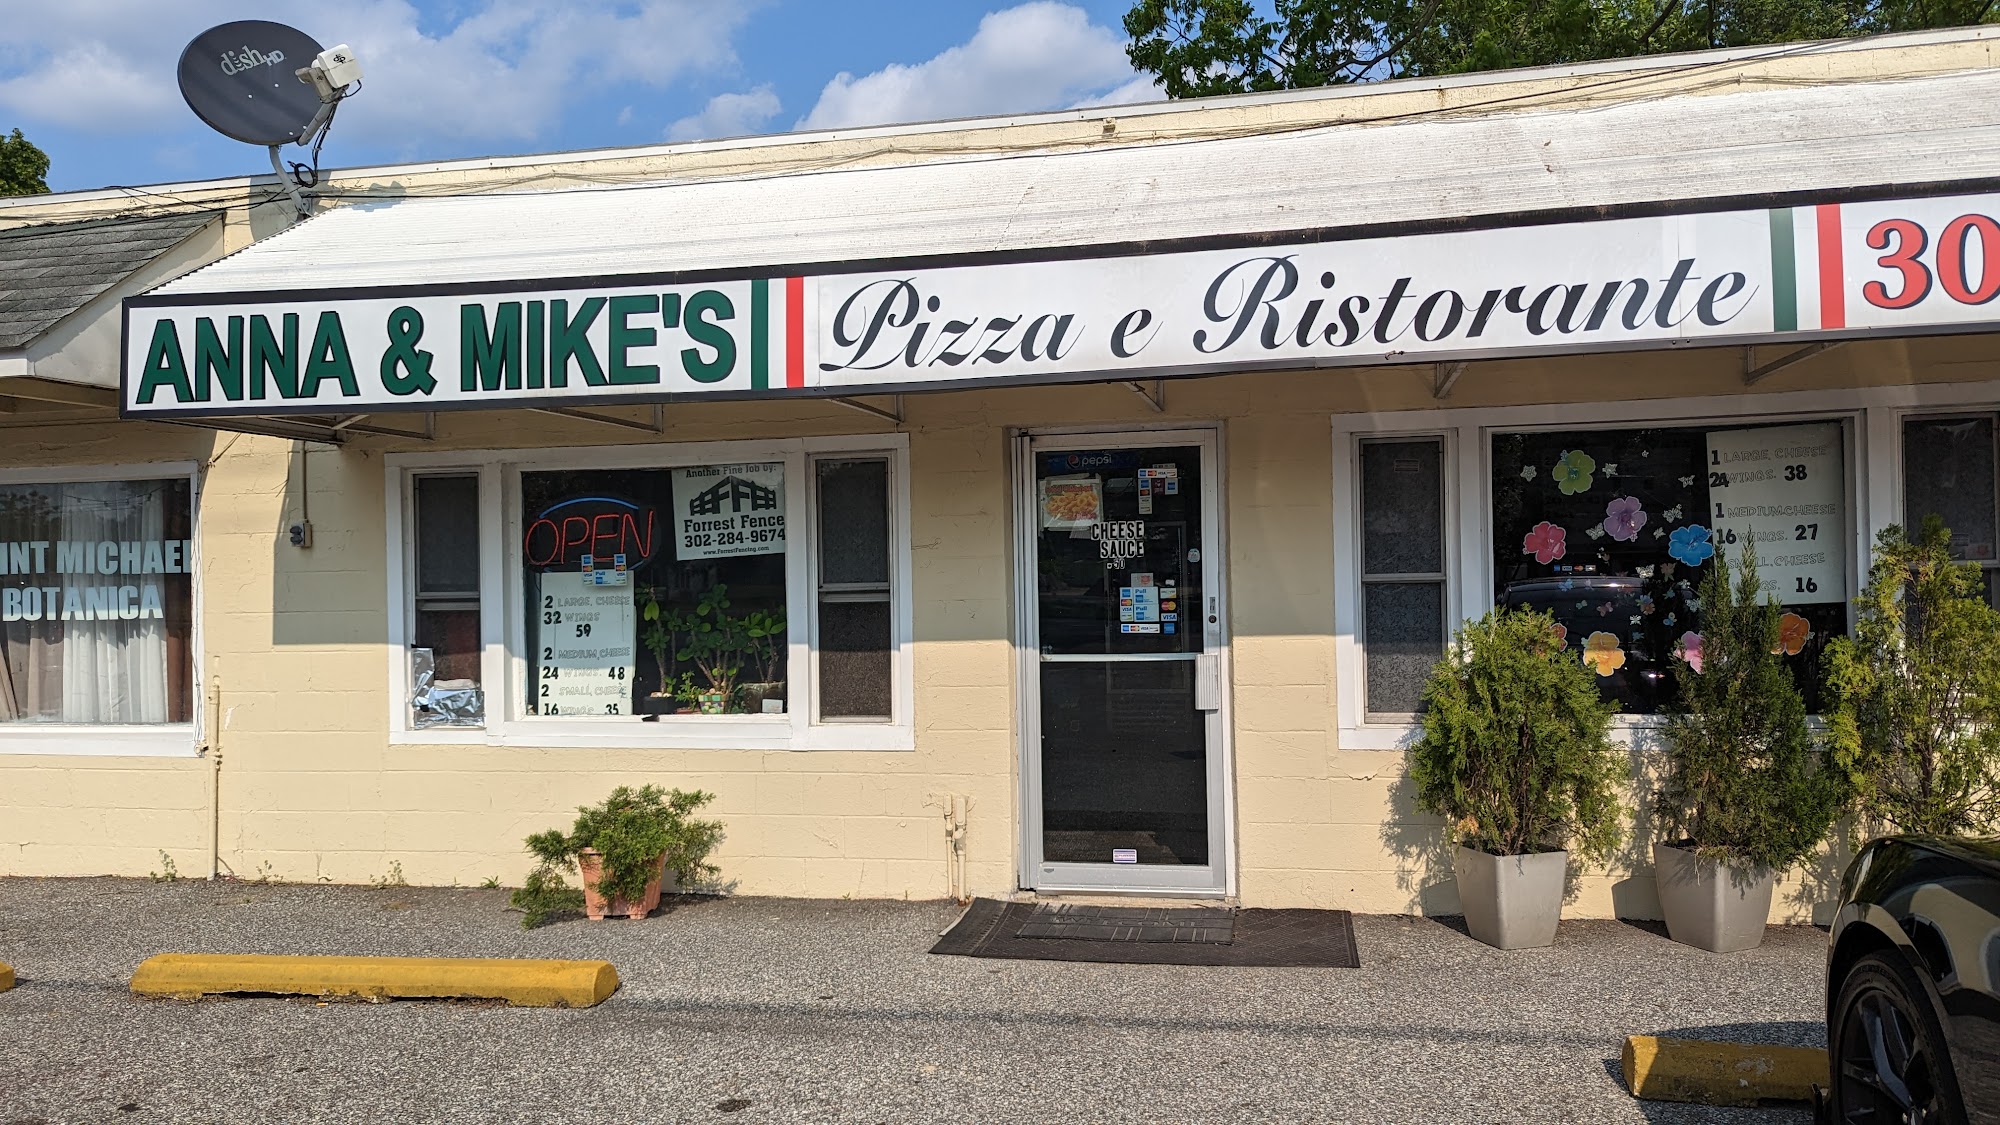 Anna & Mike's Pizza